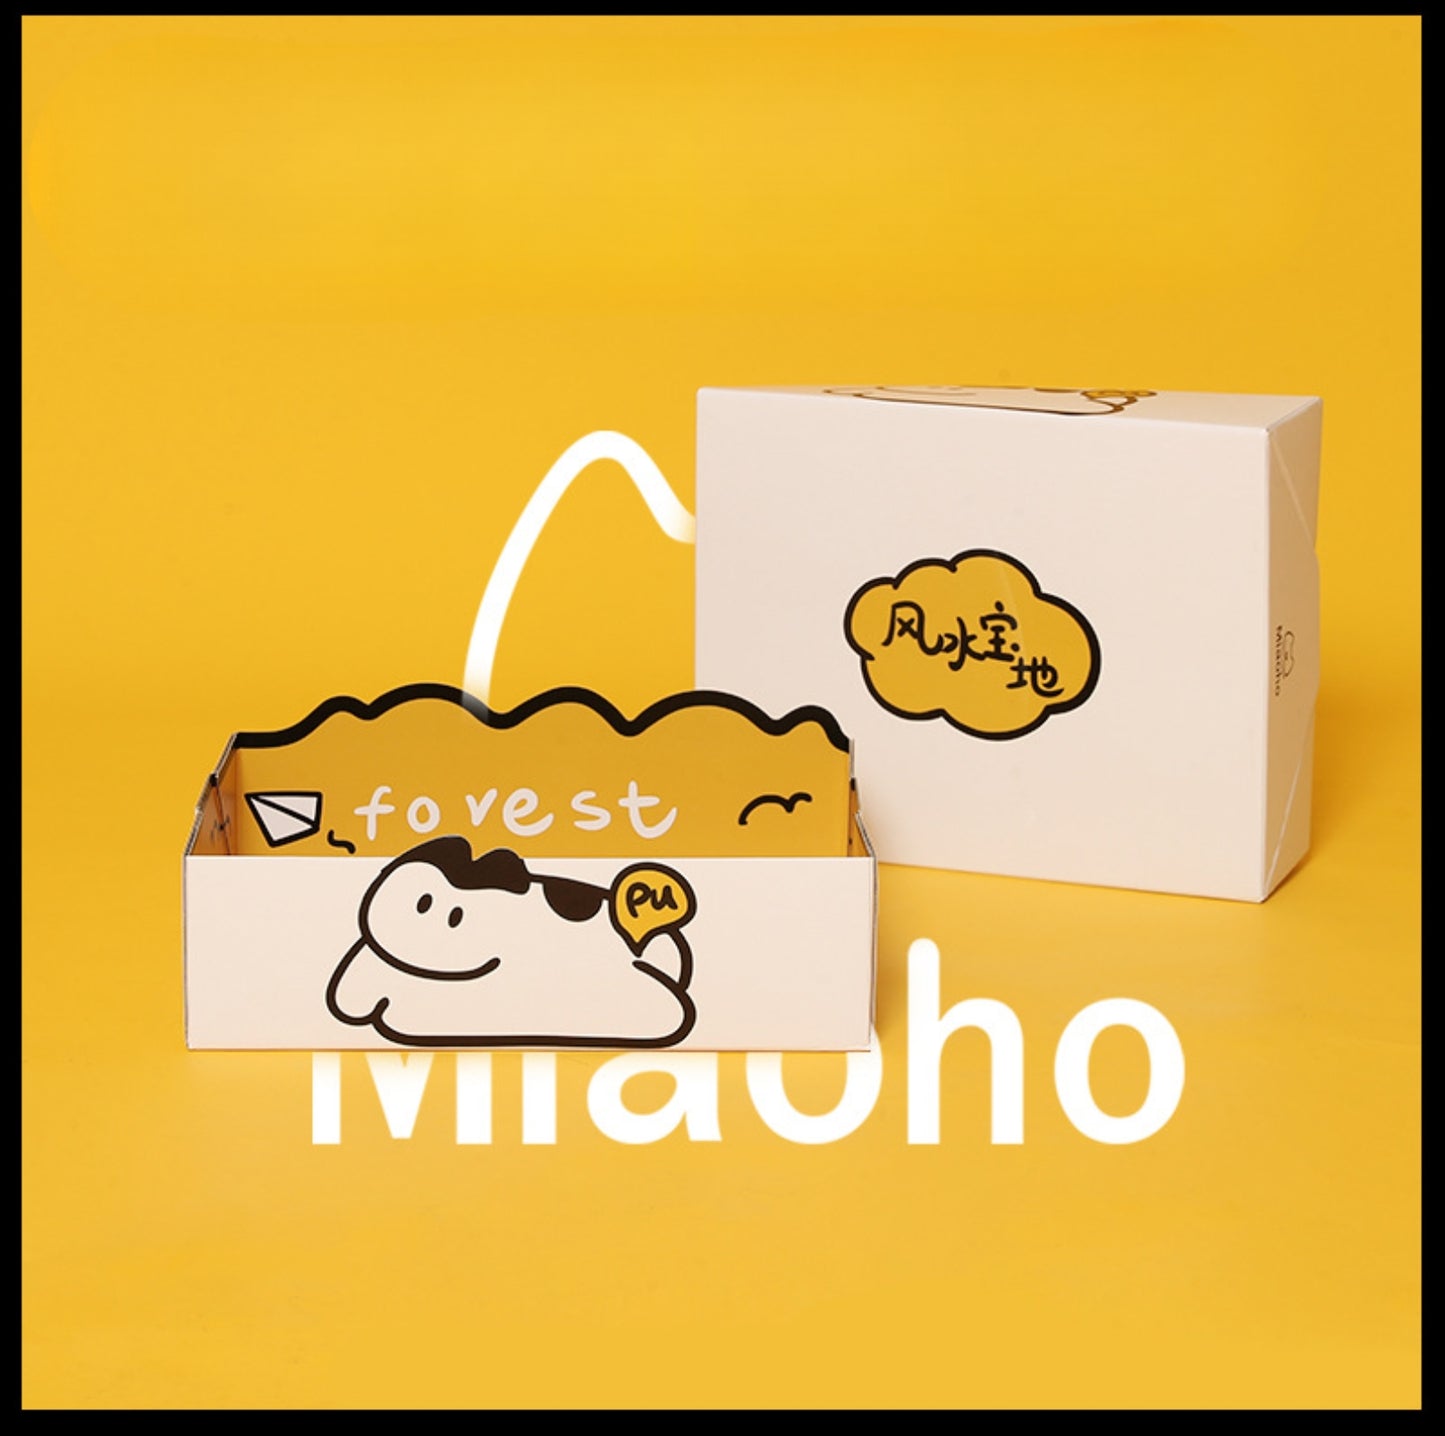 Miaoho Paper-based Portable and Foldable Cat Litter Tray